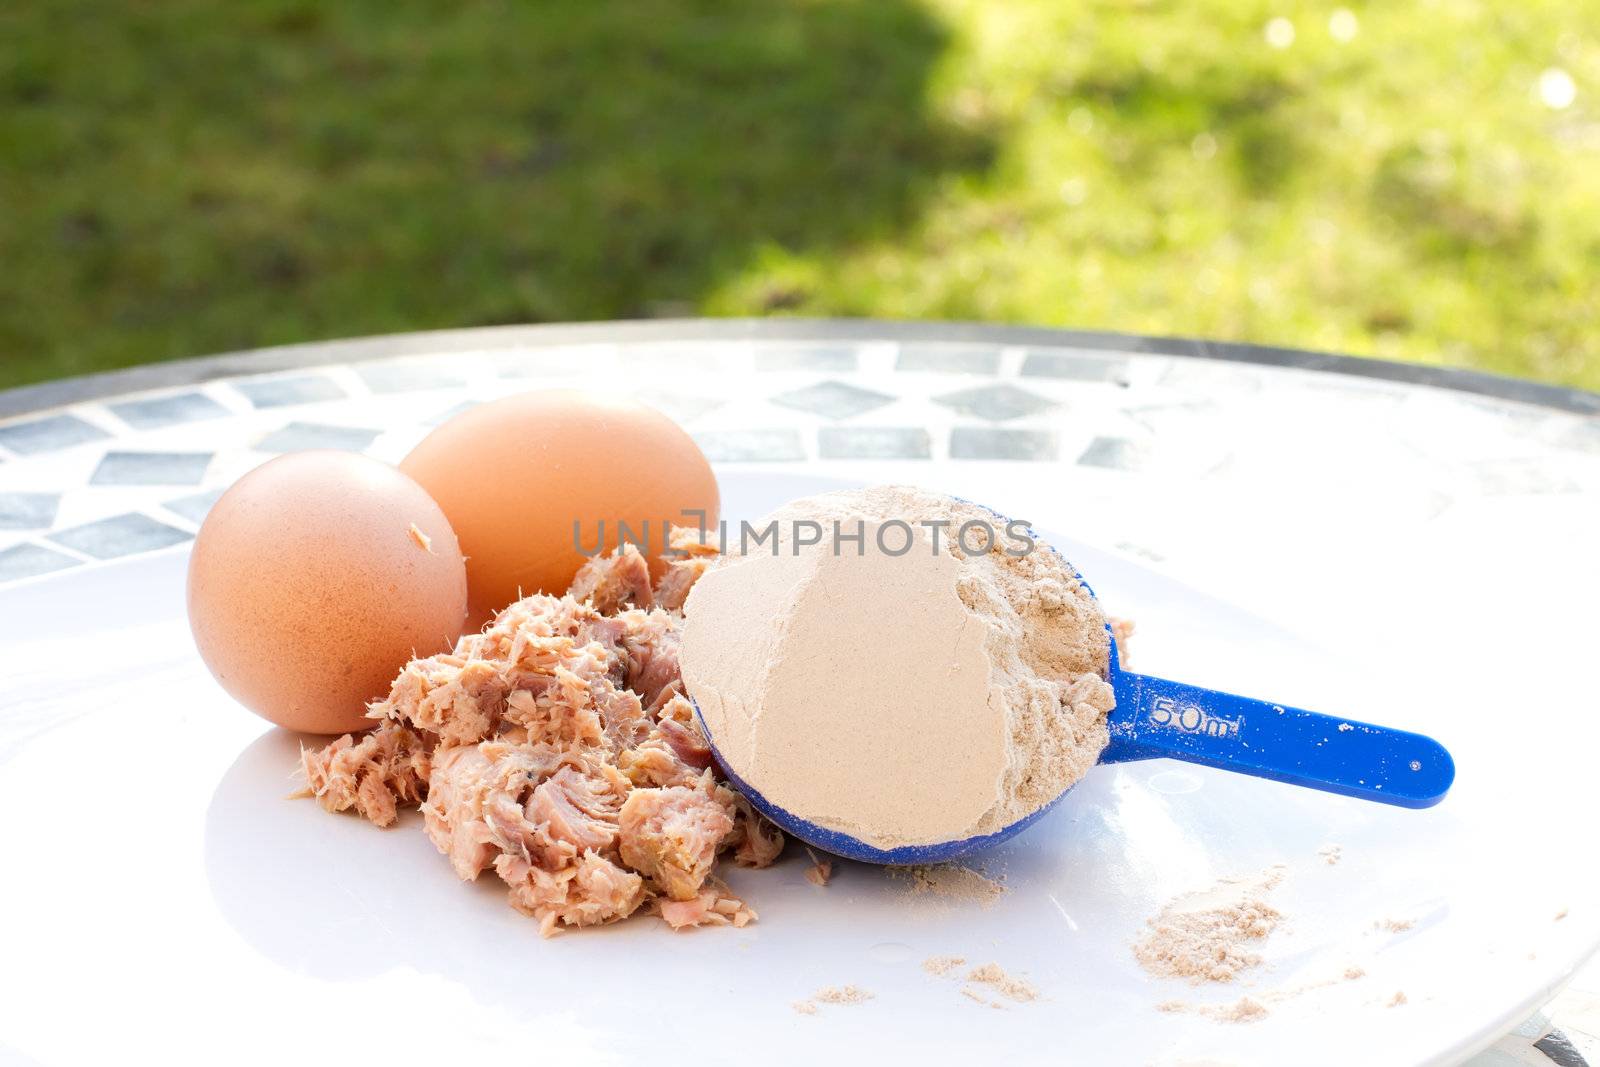 Tuna, egg and whey protein powder on a white plate